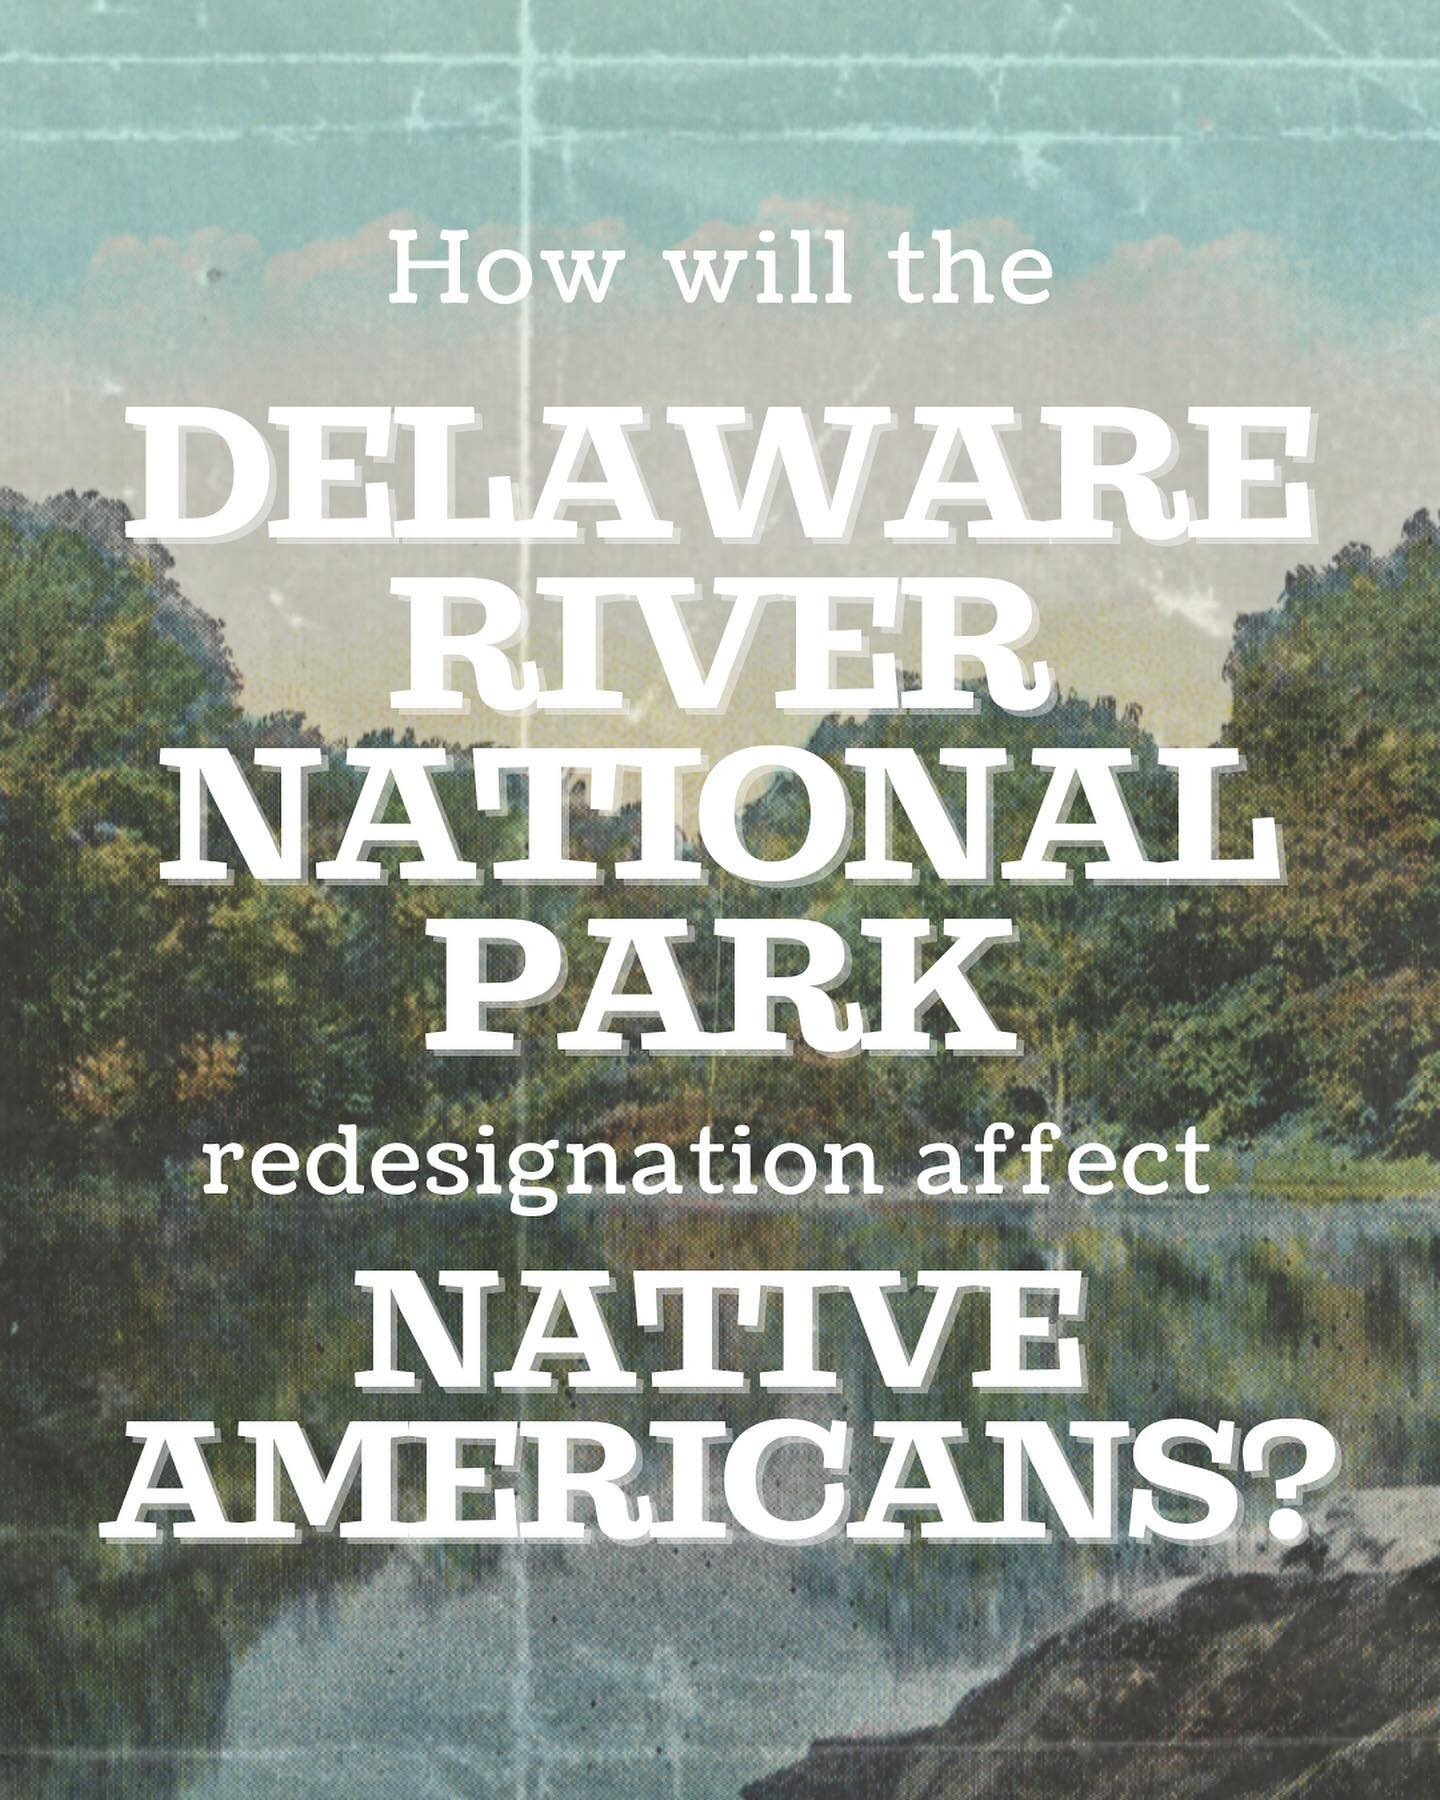 Learn how the proposal for creating a new national park in the Delaware water. Gap area might potentially affect local Native American communities.